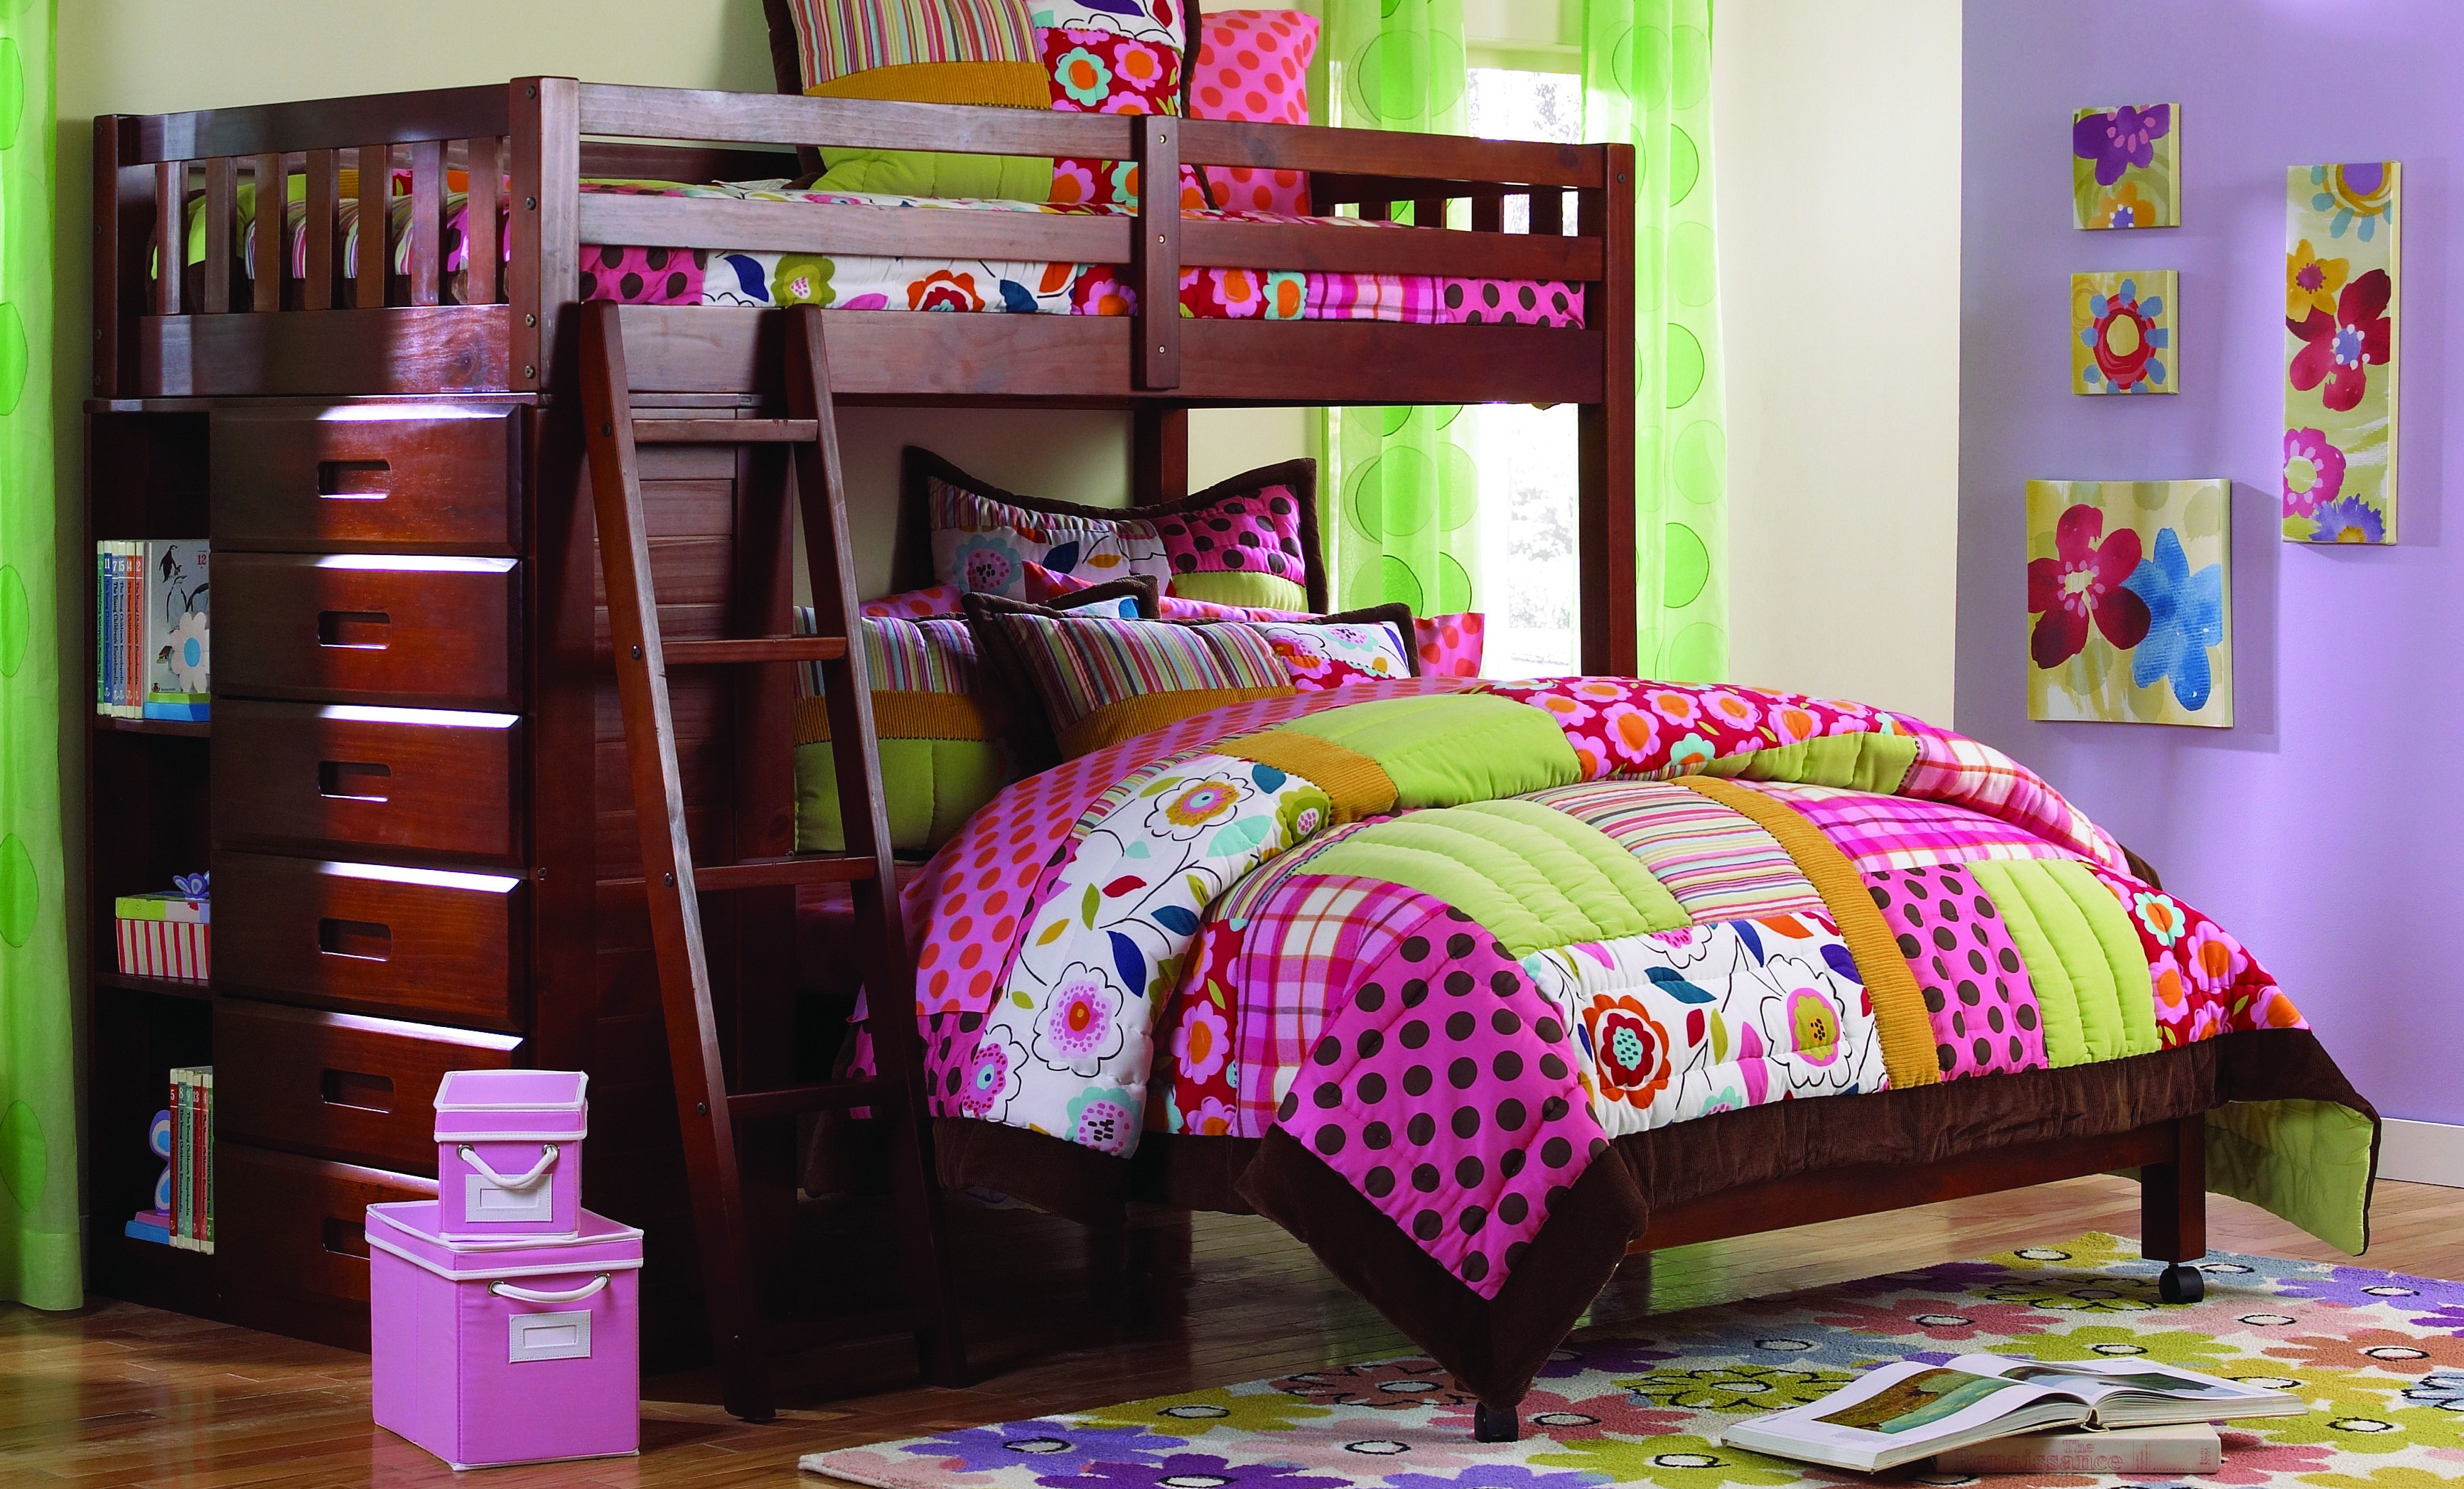 Bunk Bed With Mattresses Kfs S, College Bunk Bed Accessories